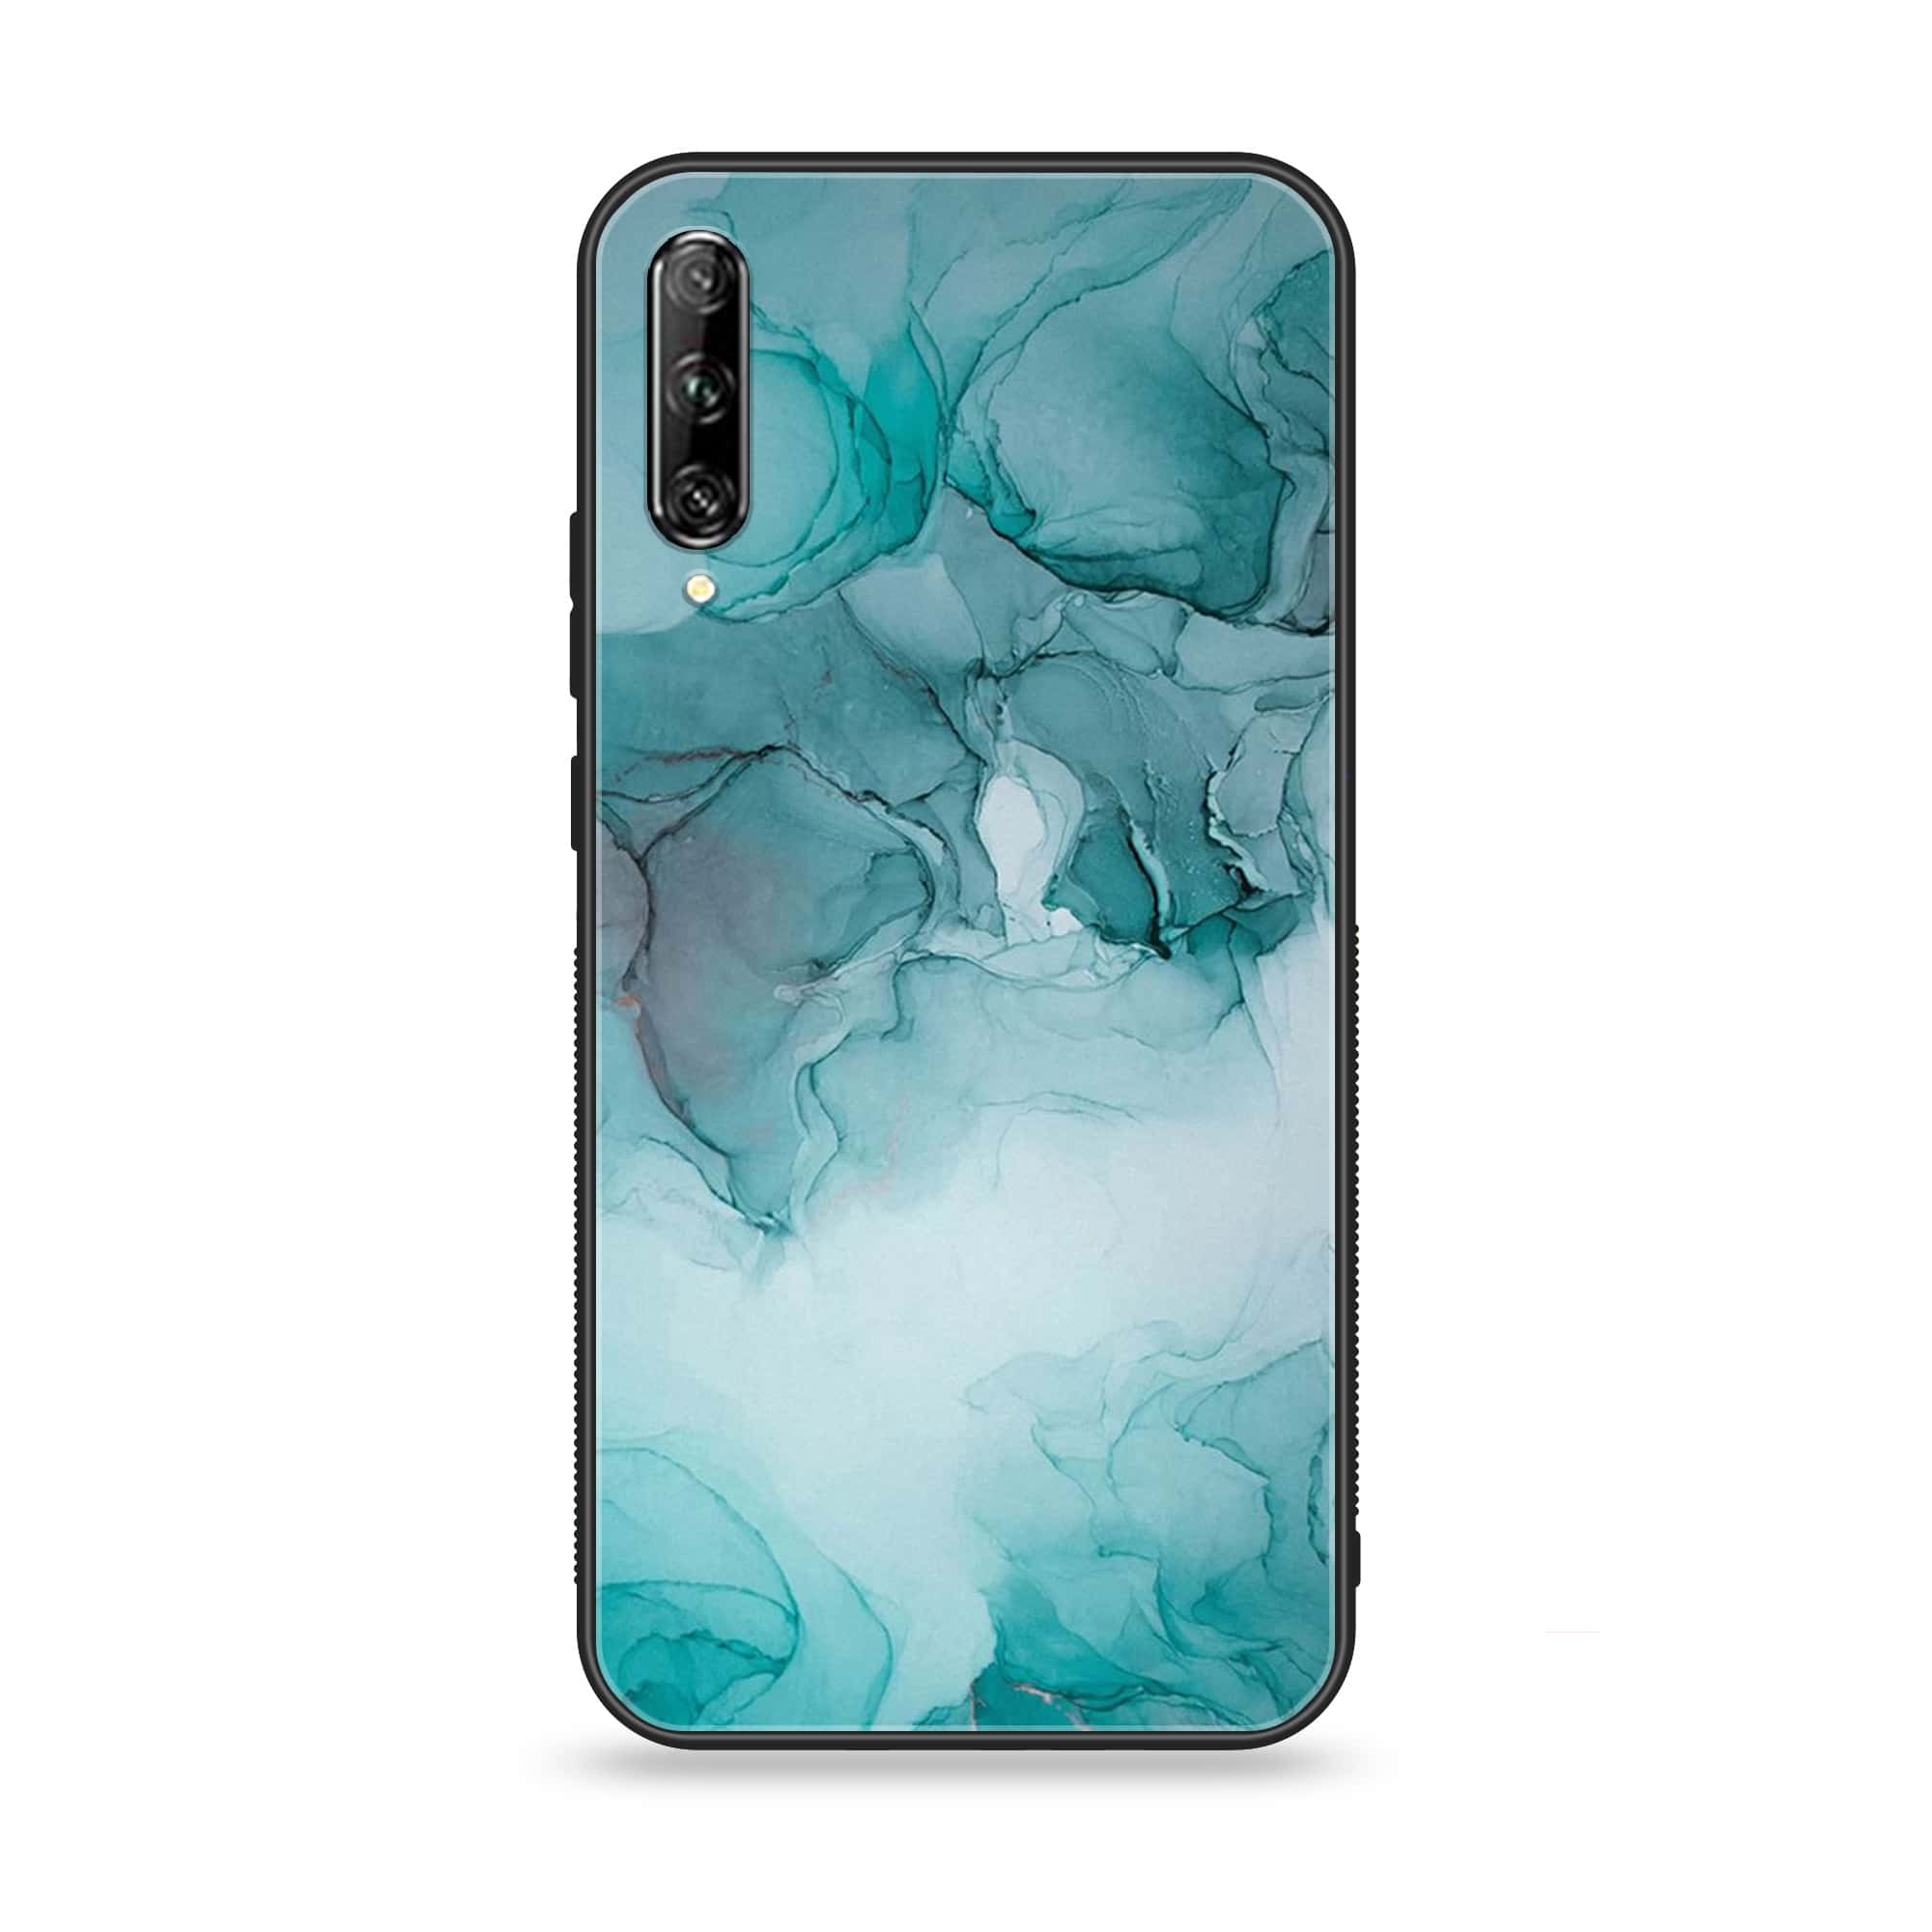 Huawei Y9s - Blue Marble Series - Premium Printed Glass soft Bumper shock Proof Case